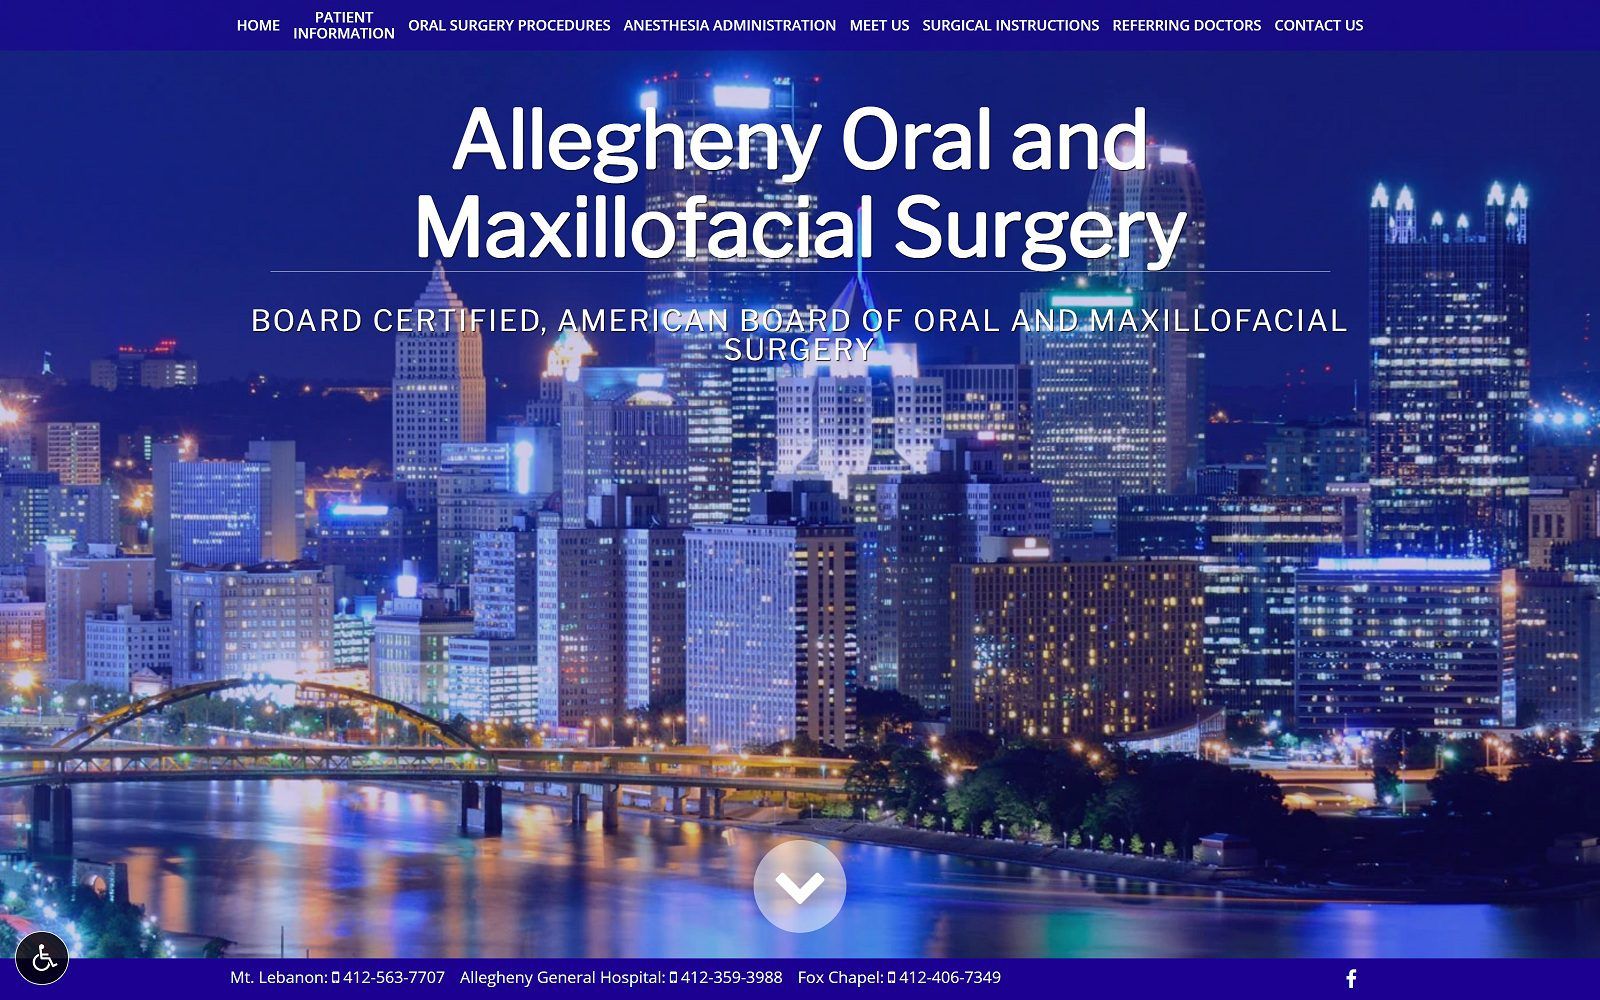 The screenshot of allegheny oral and maxillofacial surgery website